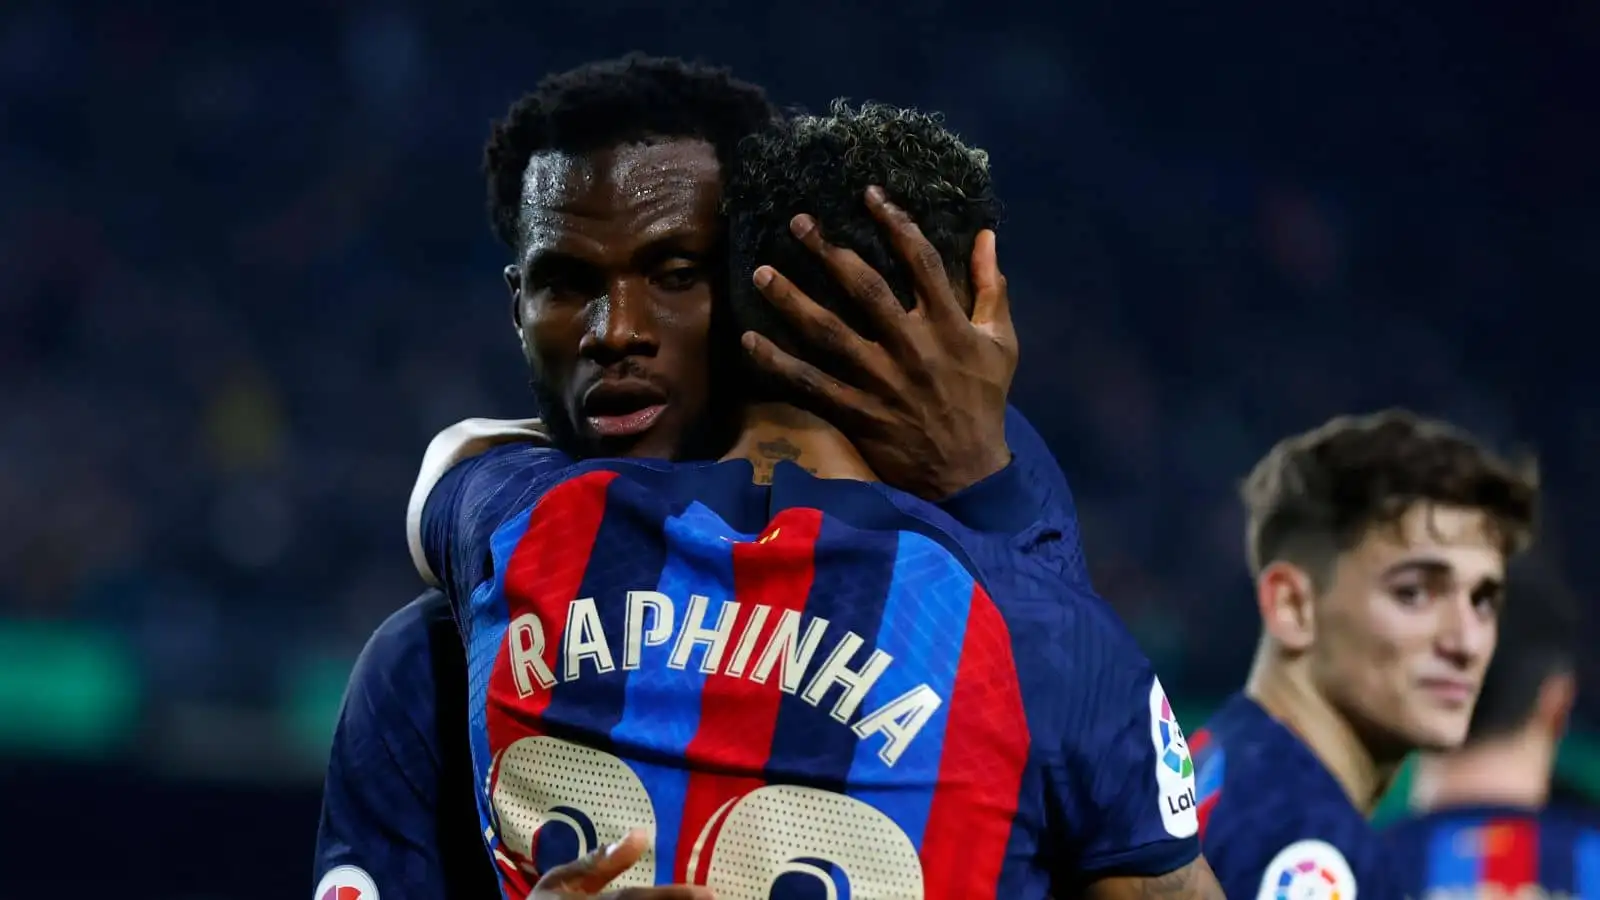 Barcelona's Raphinha, right, celebrates with Barcelona's Franck Kessie after scoring his side's third goal during a Spanish La Liga soccer match between Barcelona and Sevilla at the Camp Nou stadium in Barcelona